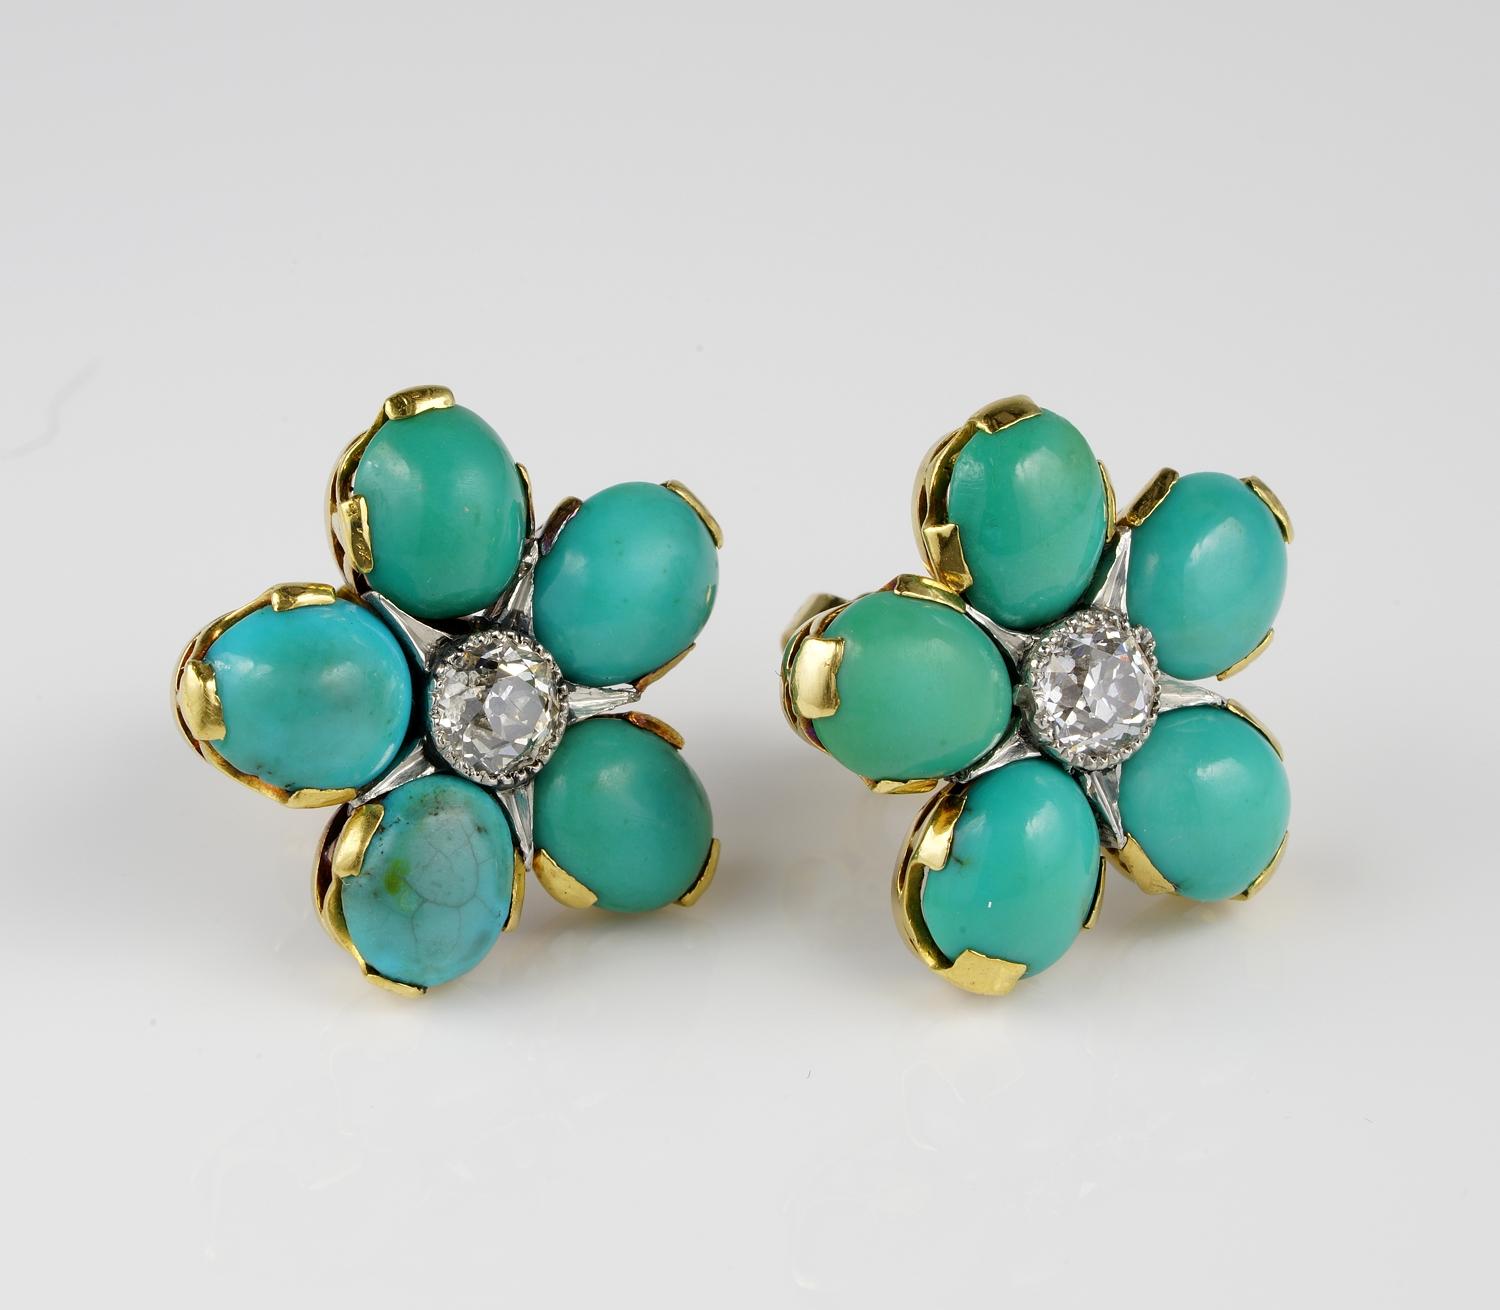 Stunning Floret!

Get in love with this stunning pair of Edwardian era Diamond and Persian Turquoise earrings
Enchanting 20 mm, Diameter just the right size to adorn all day long your ears with something rare and so special
Studs made for easy wear,